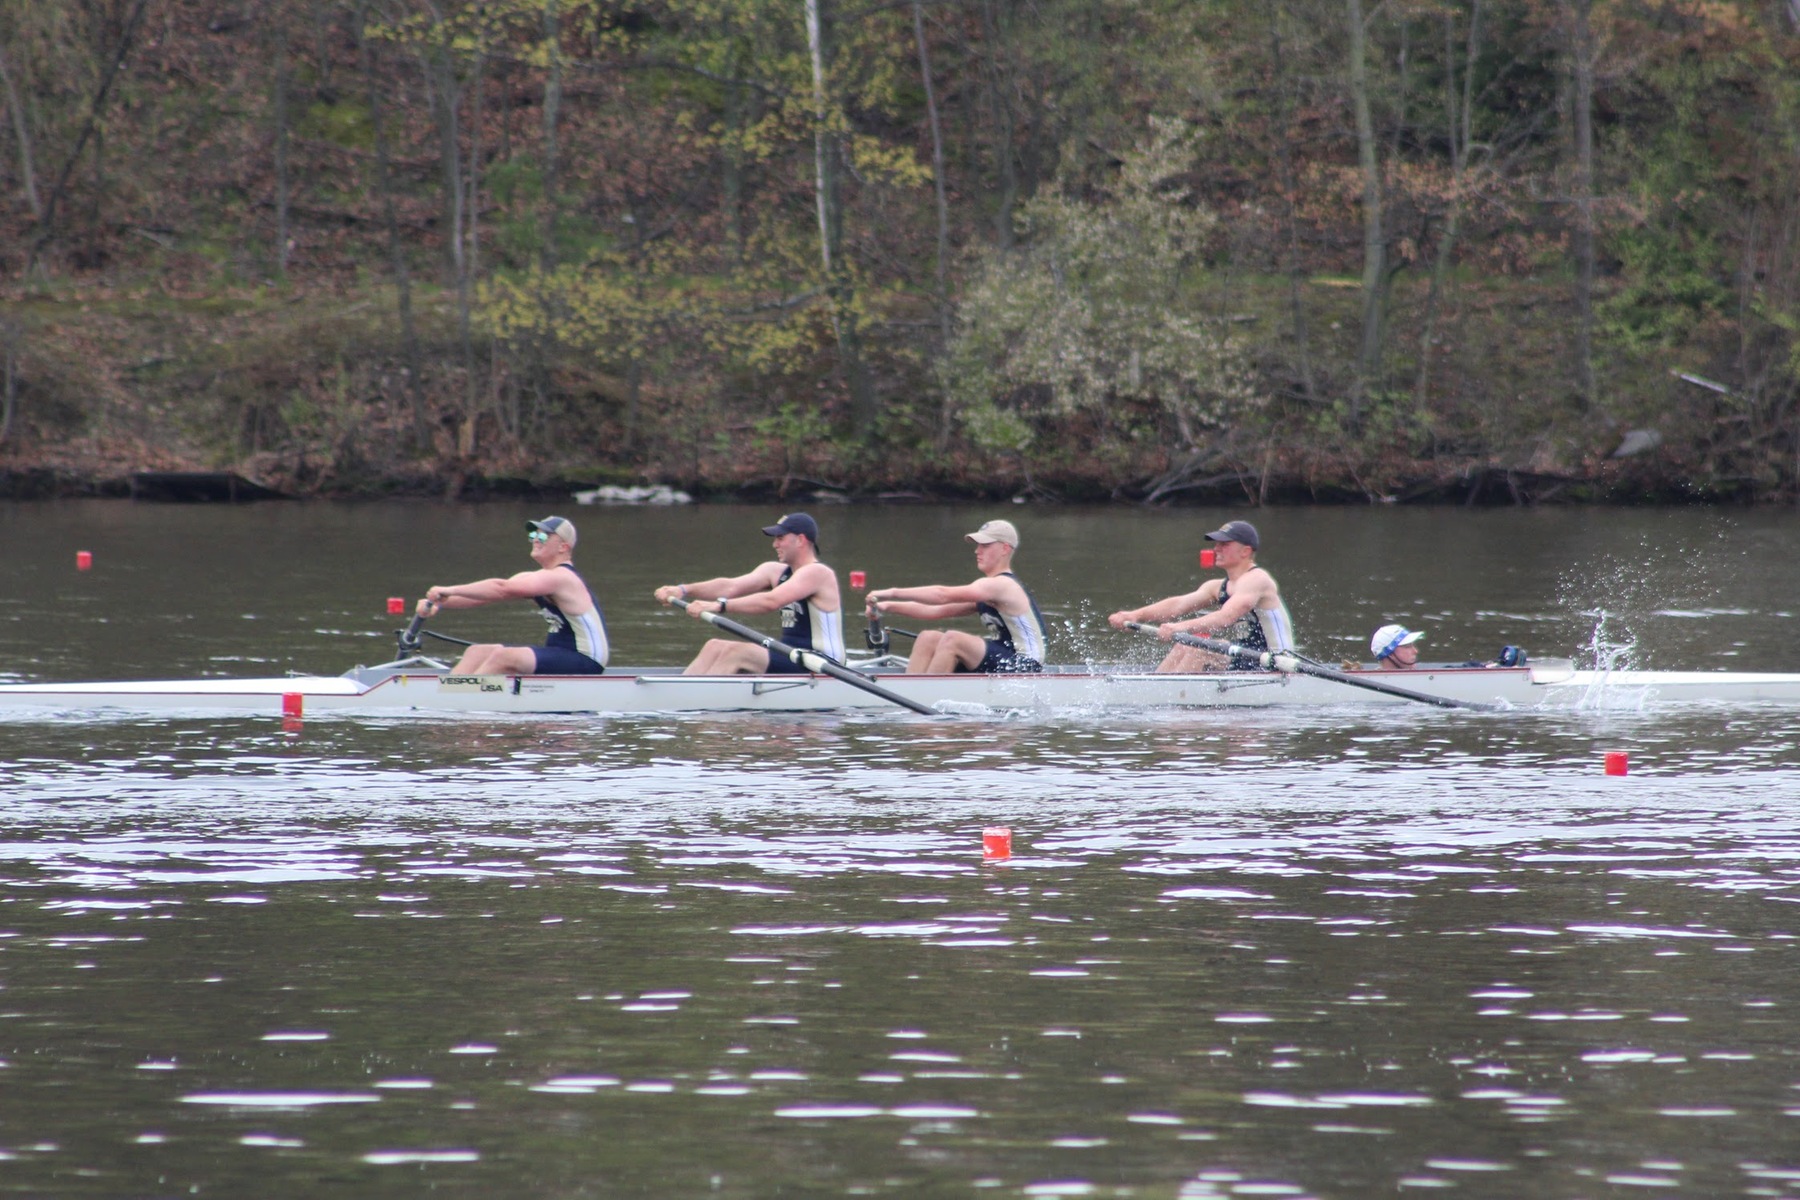 Maritime Secures Multiple Top Three Finishes at New England Rowing Championships